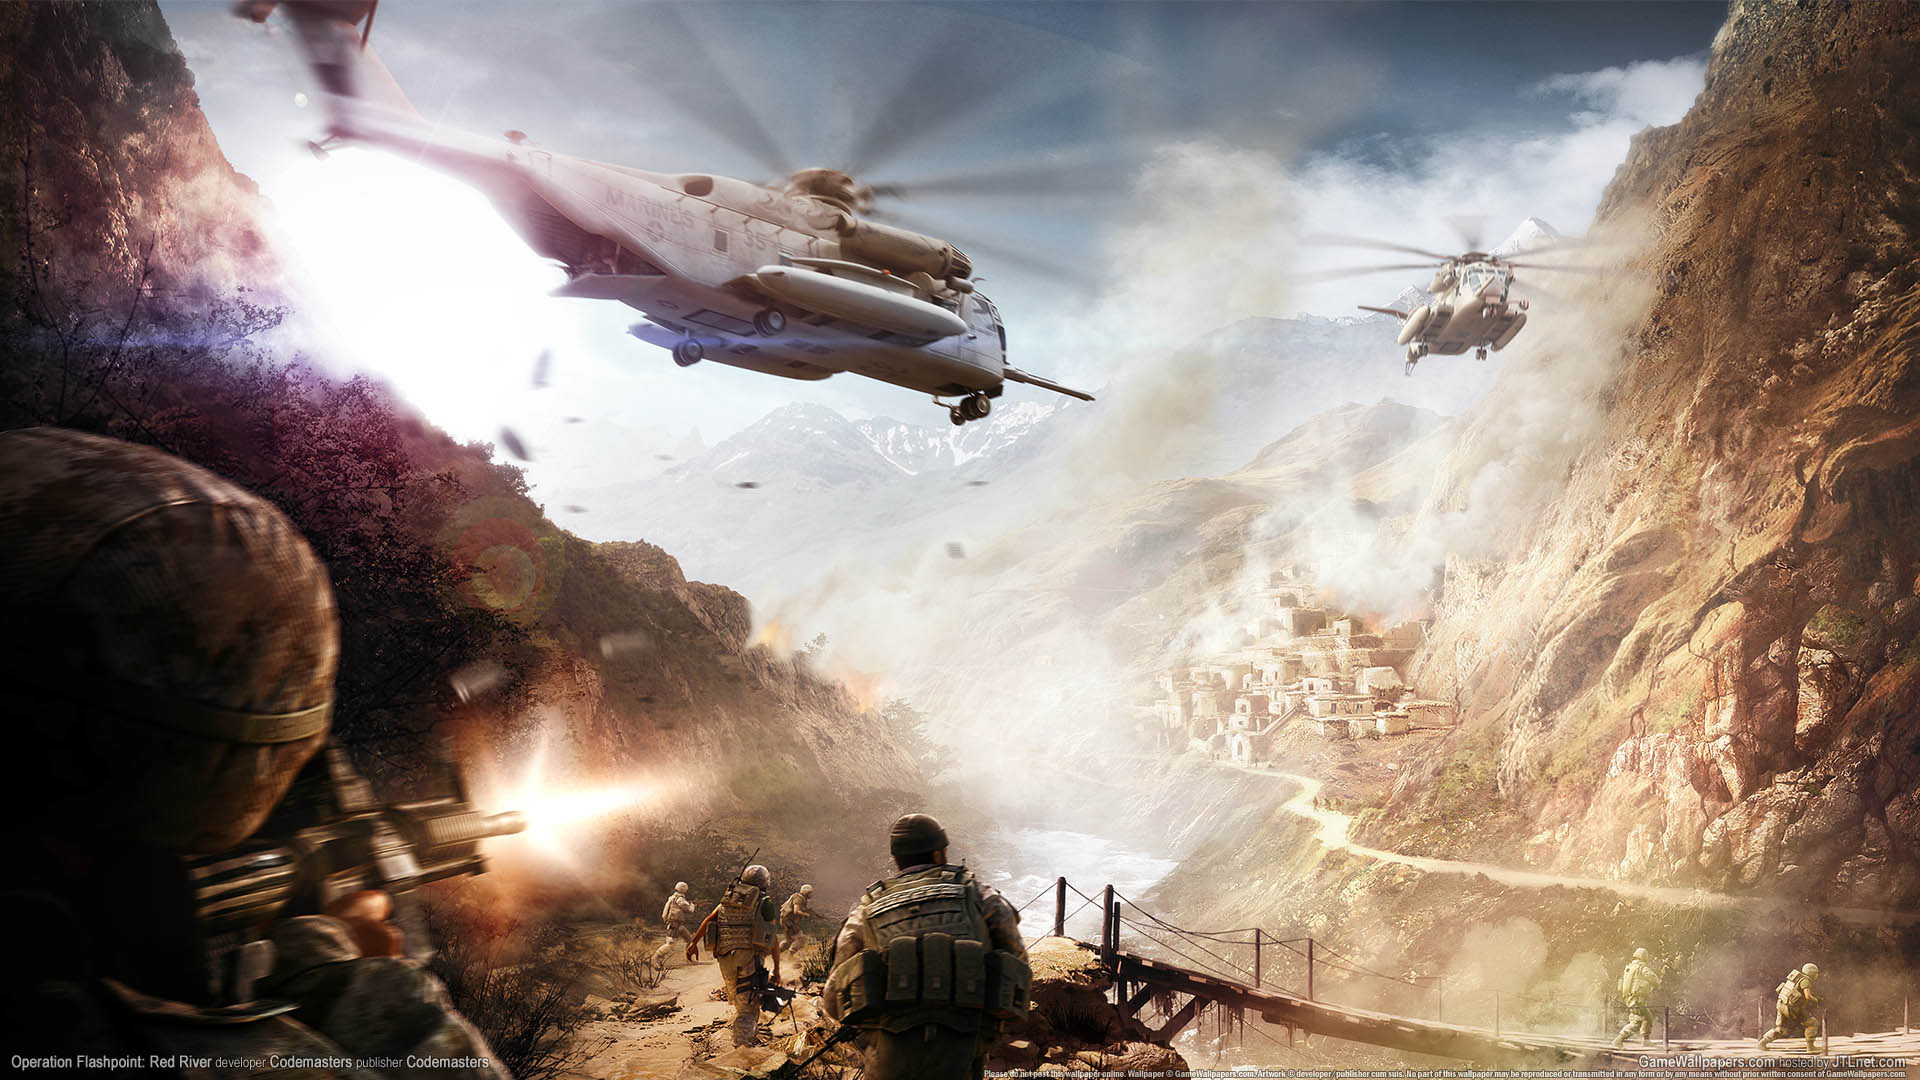 Wallpapers war the battle helicopter on the desktop